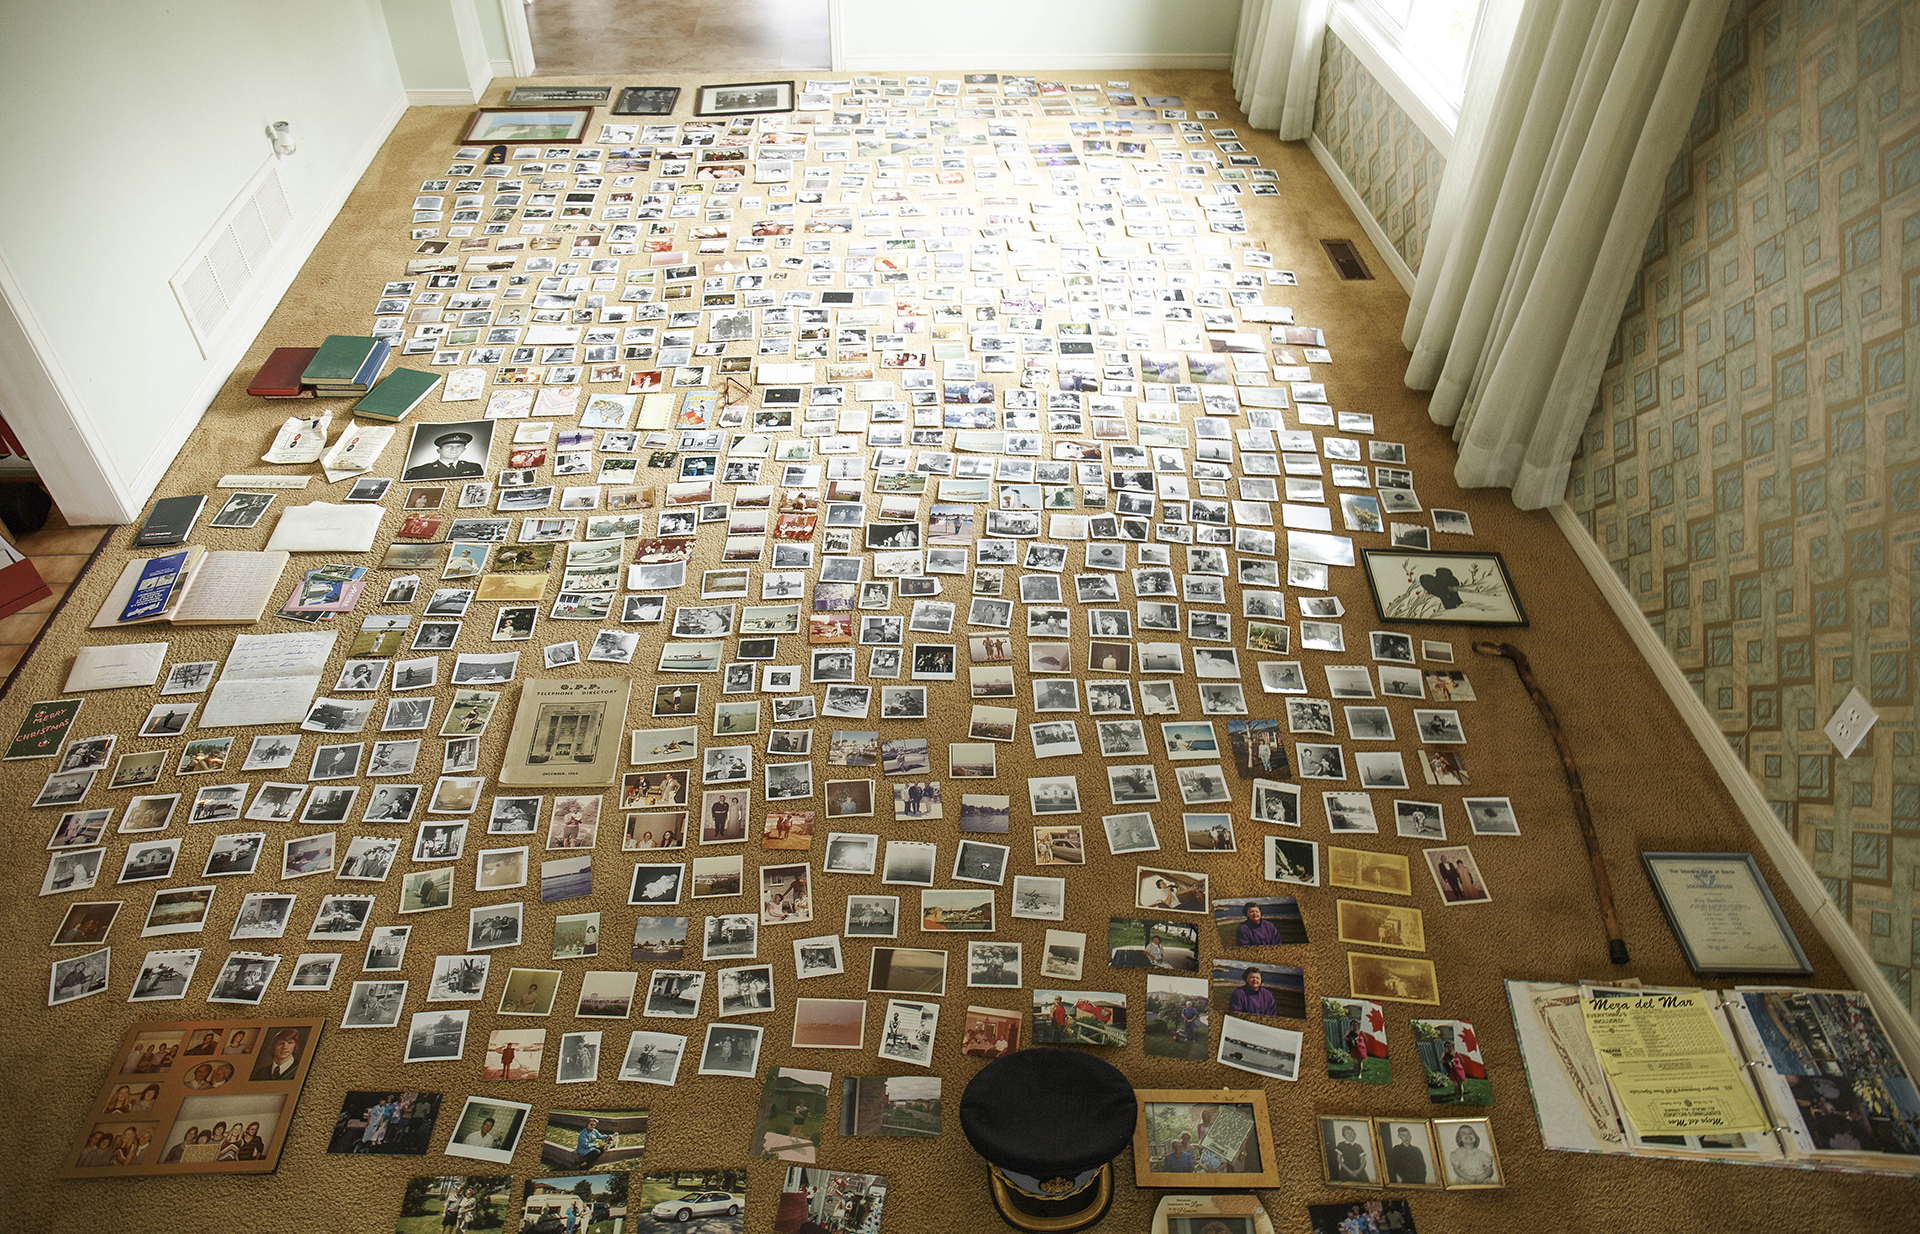 ALL OF HIM: Photograph of archives layed out on the floor